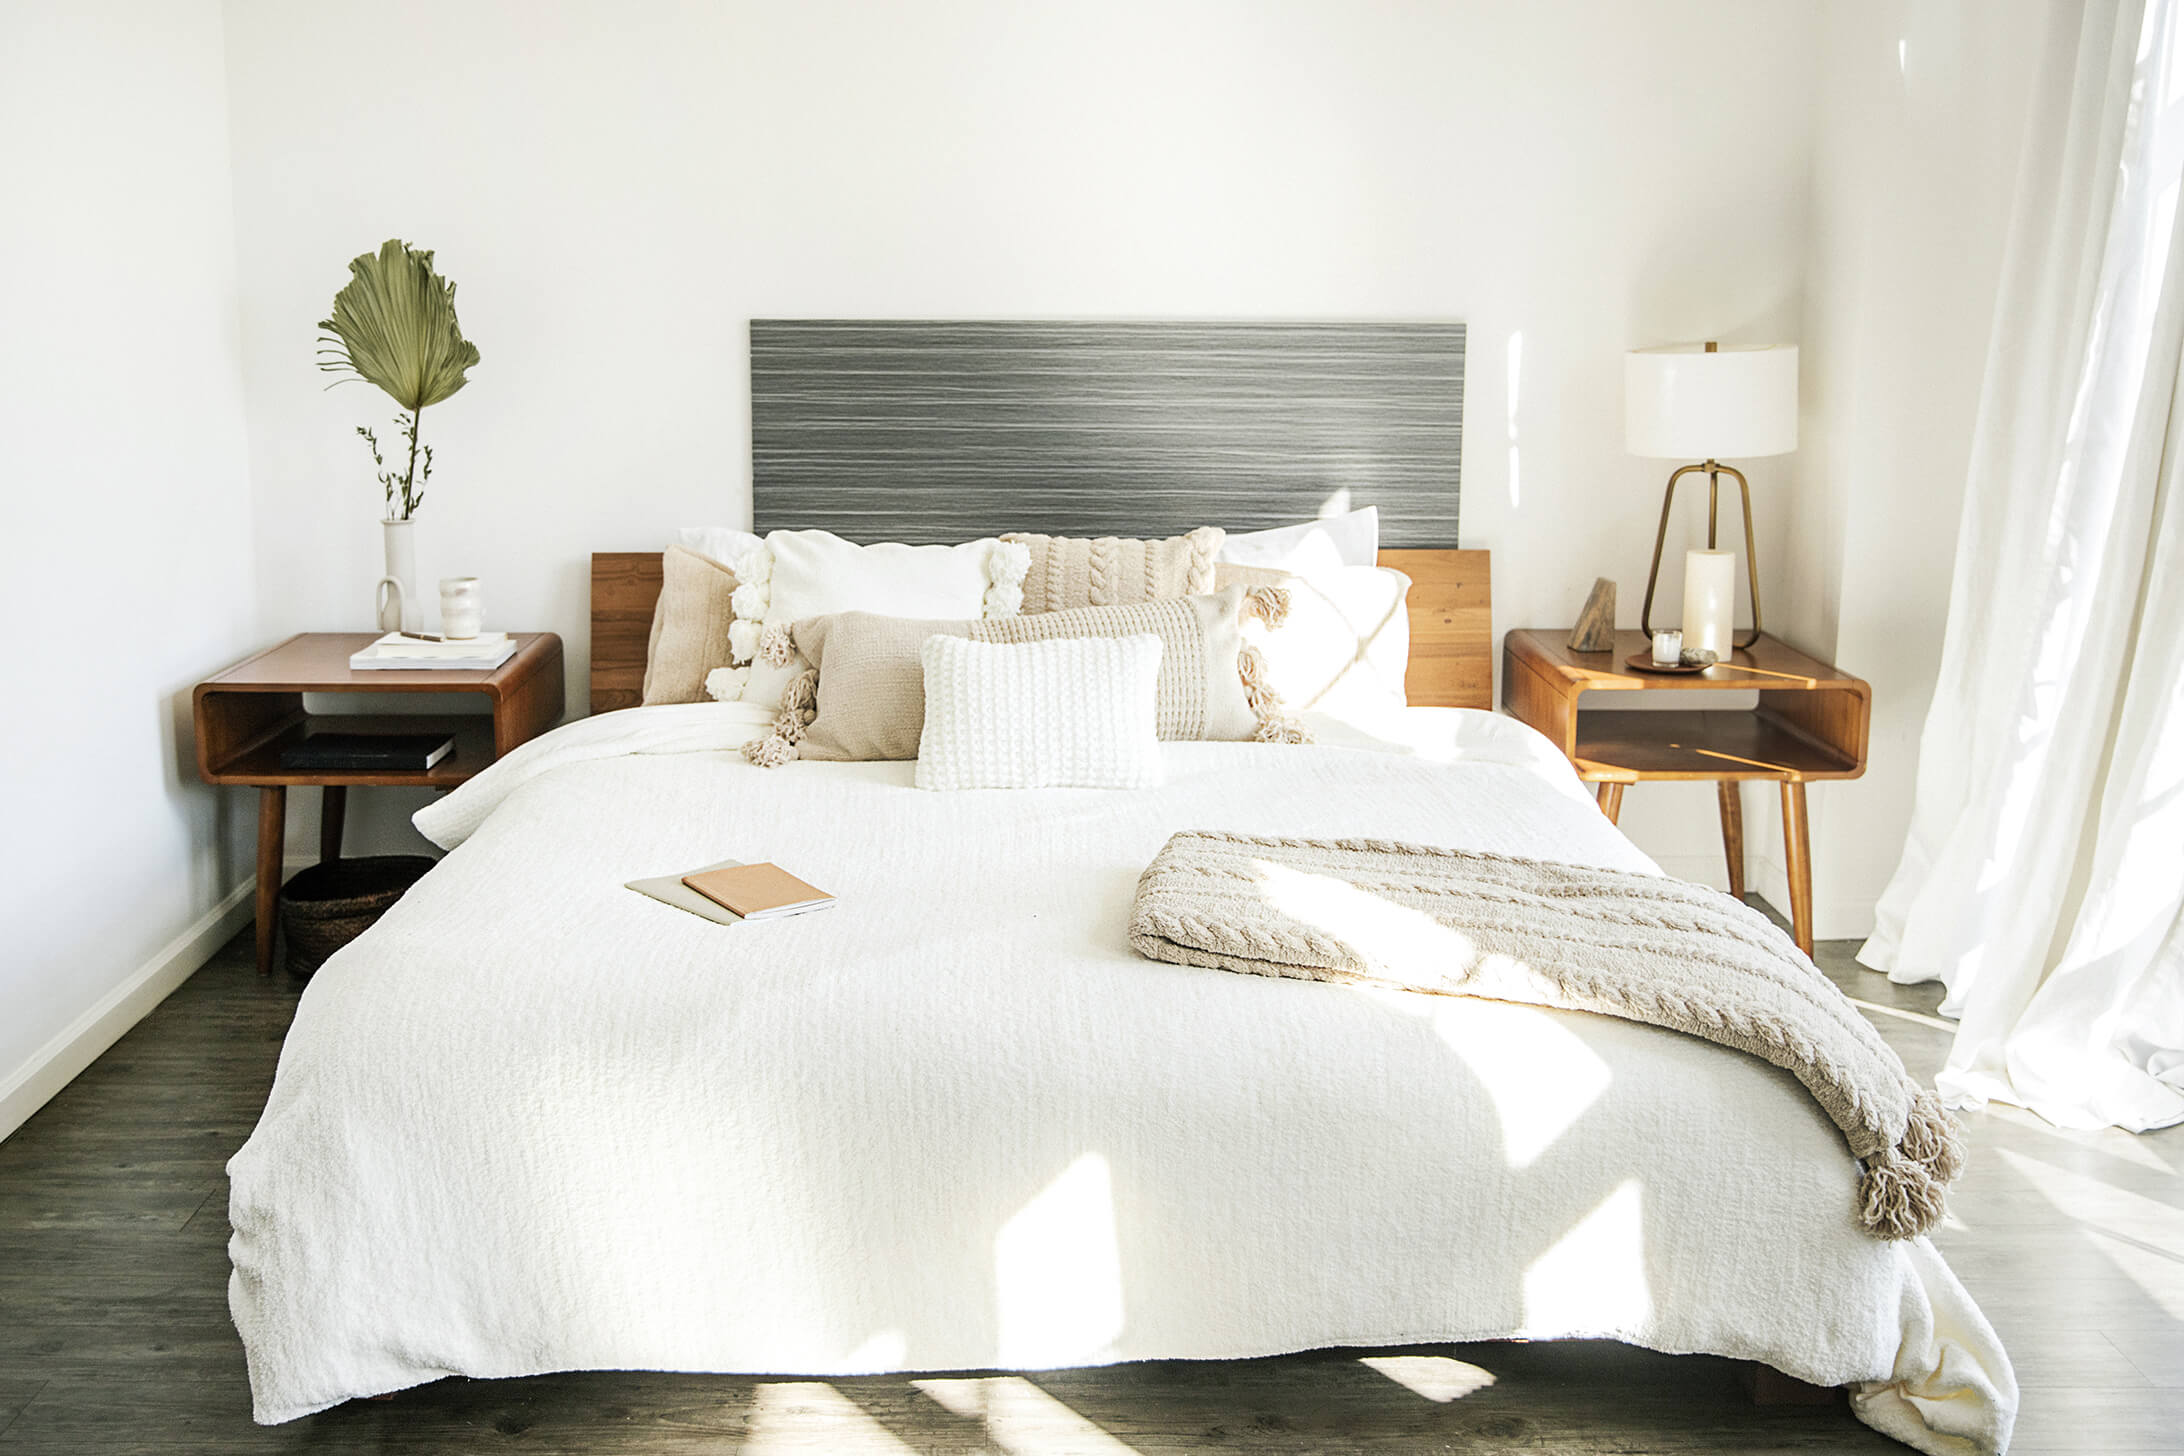 How to Choose a Duvet Cover? Sunday Citizen Snug Bamboo Duvet Cover in Off-White. White and Beige Throw Pillows on the bed.